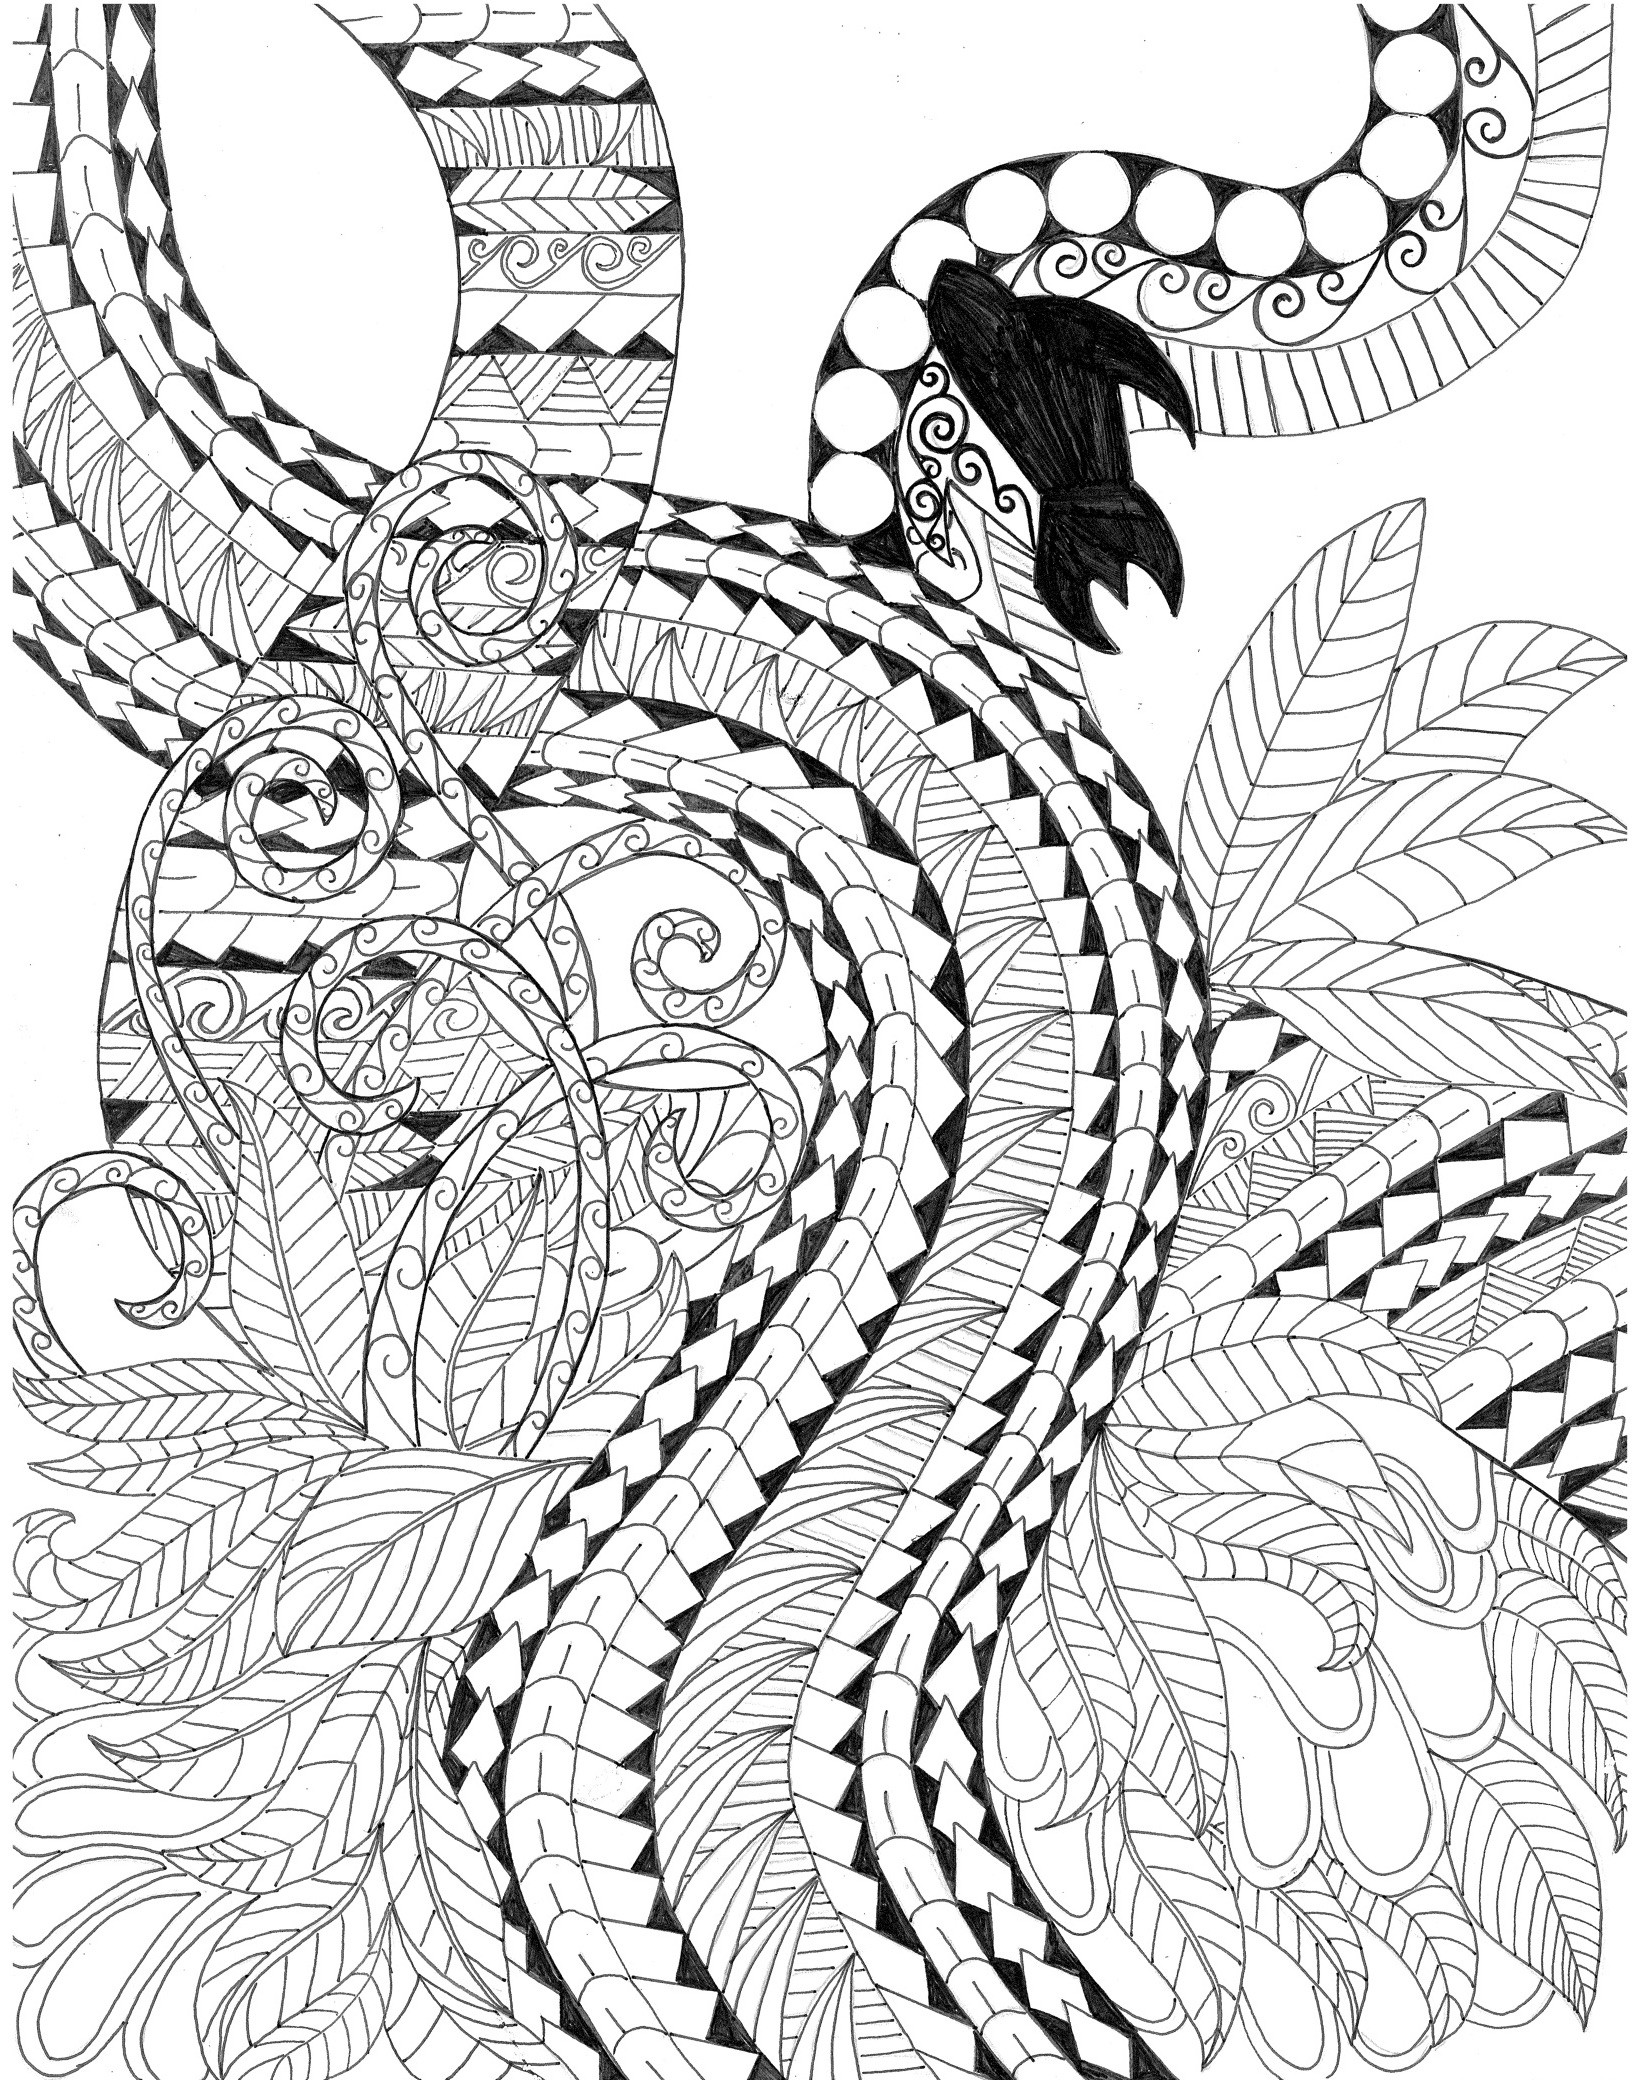 33 New Zealand Flag Coloring Pages - Free Printable Coloring Pages